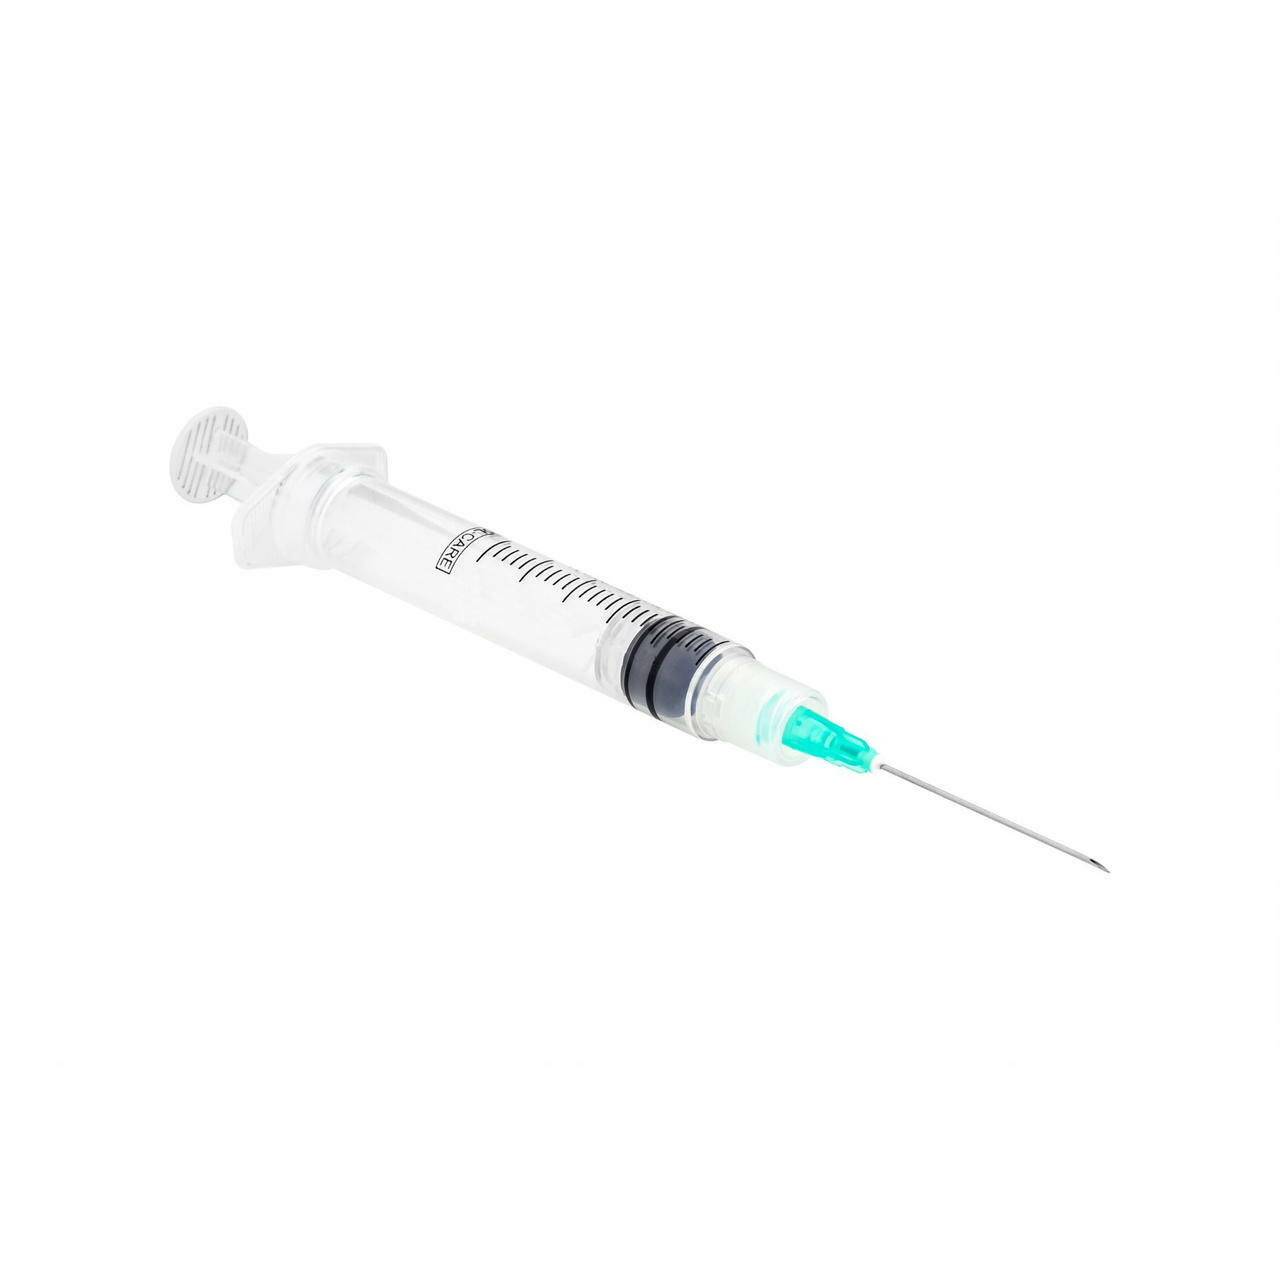 10ml 21g 1.5 inch Sol-Care Luer Lock Safety Syringe and Needle